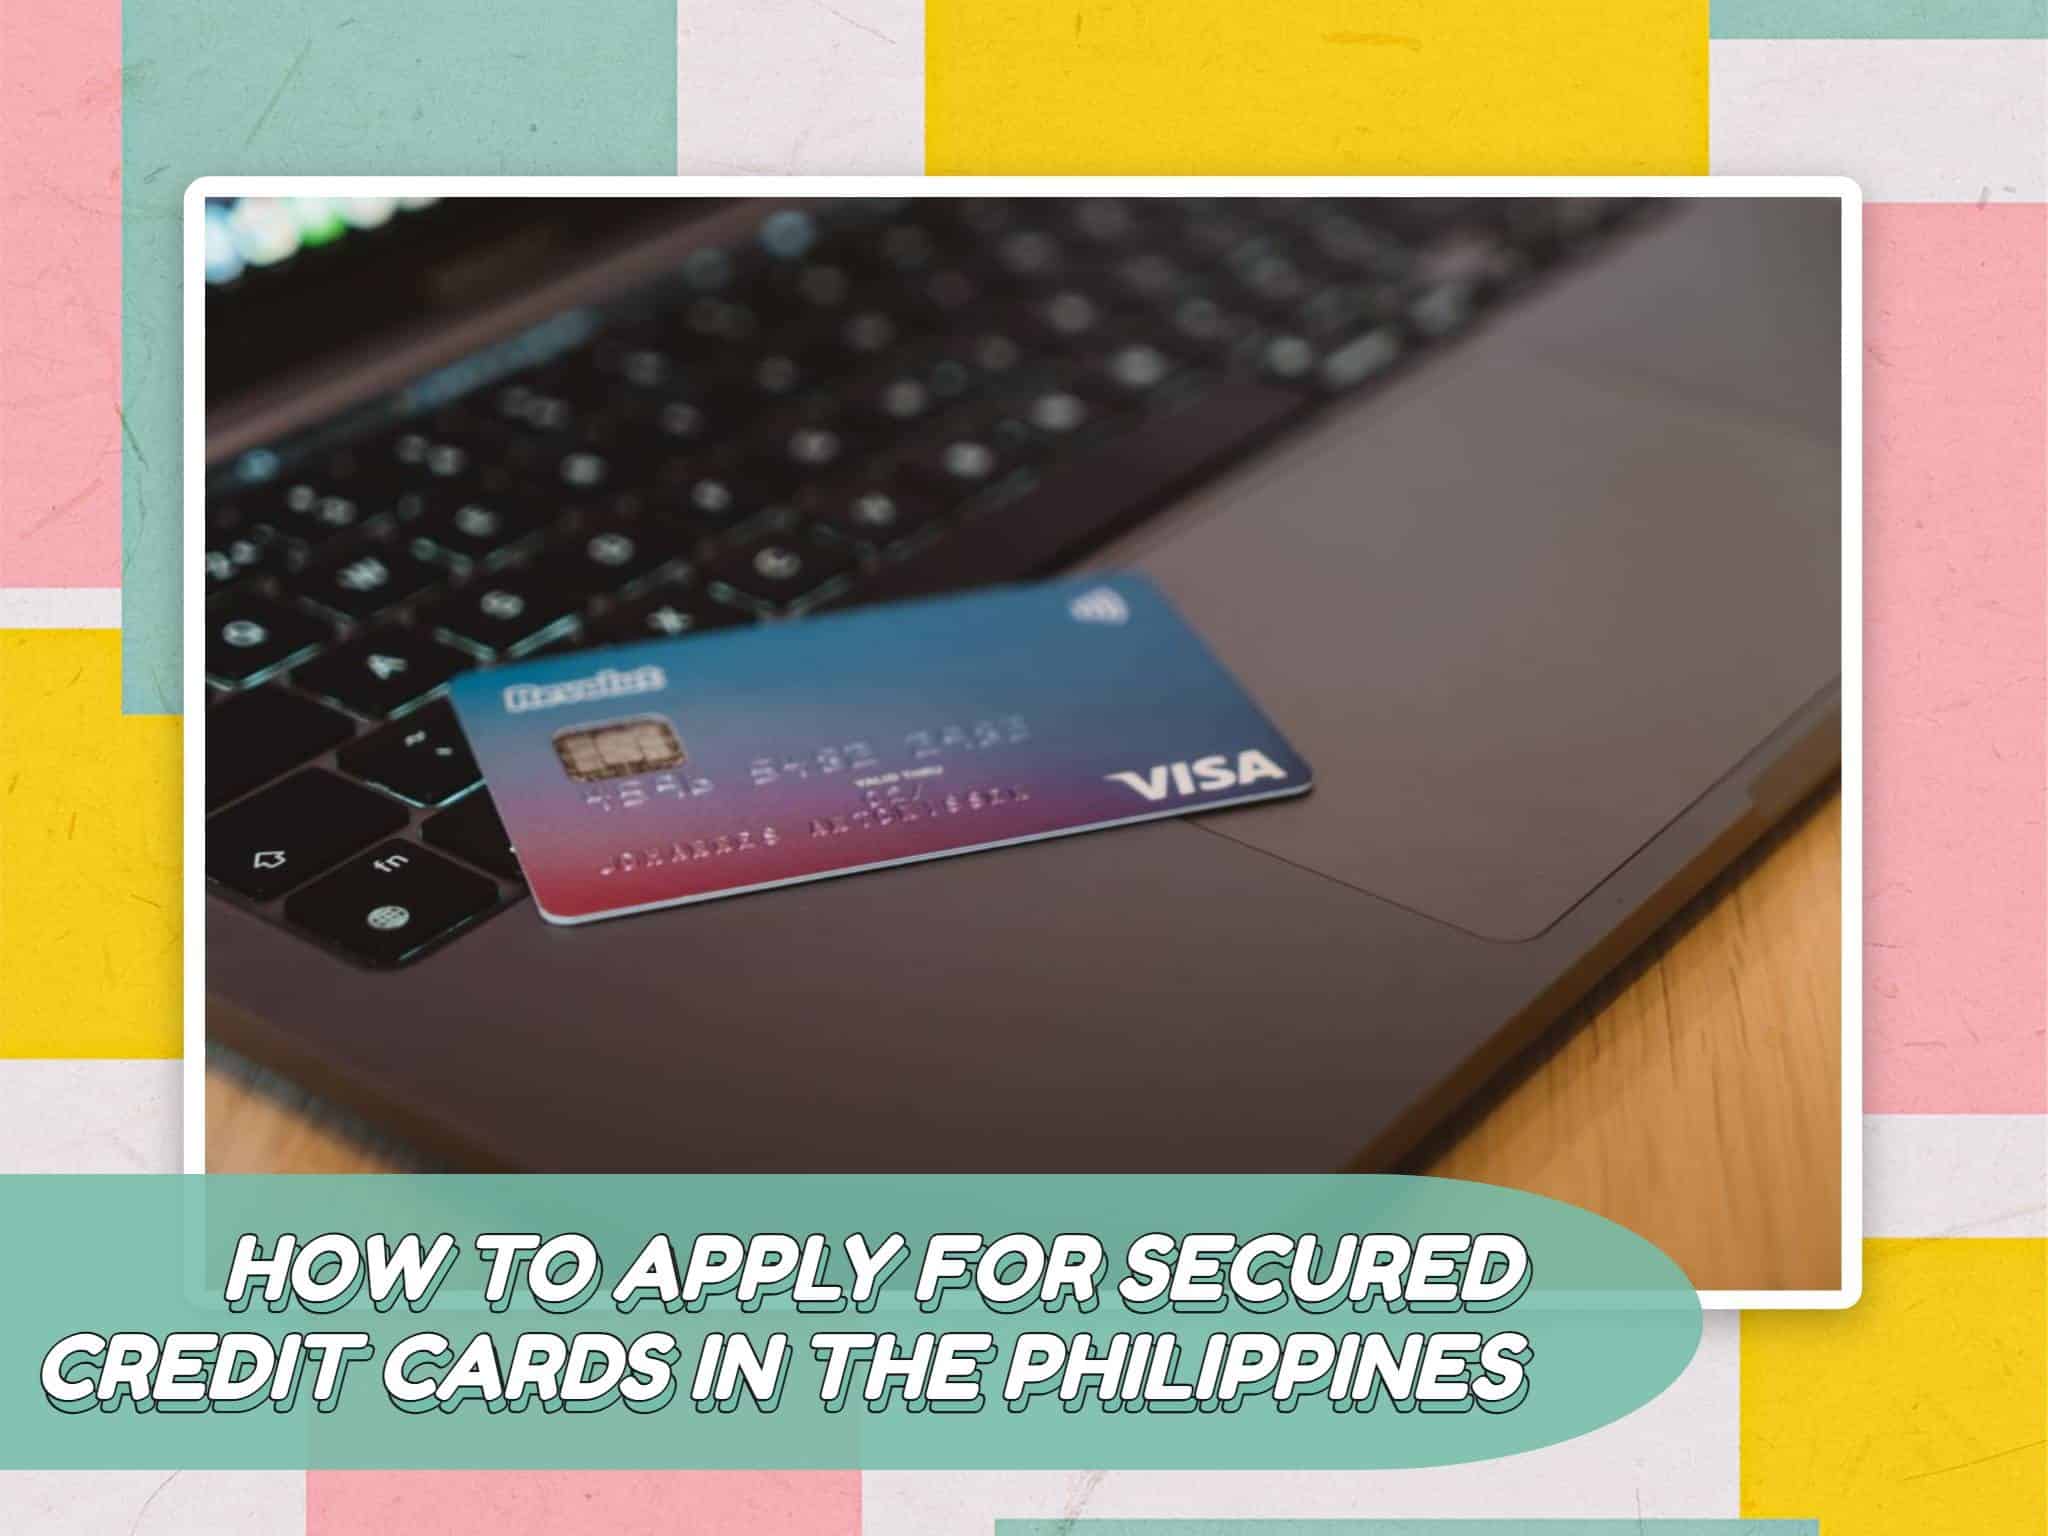 How to Apply for Secured Credit Cards in the Philippines